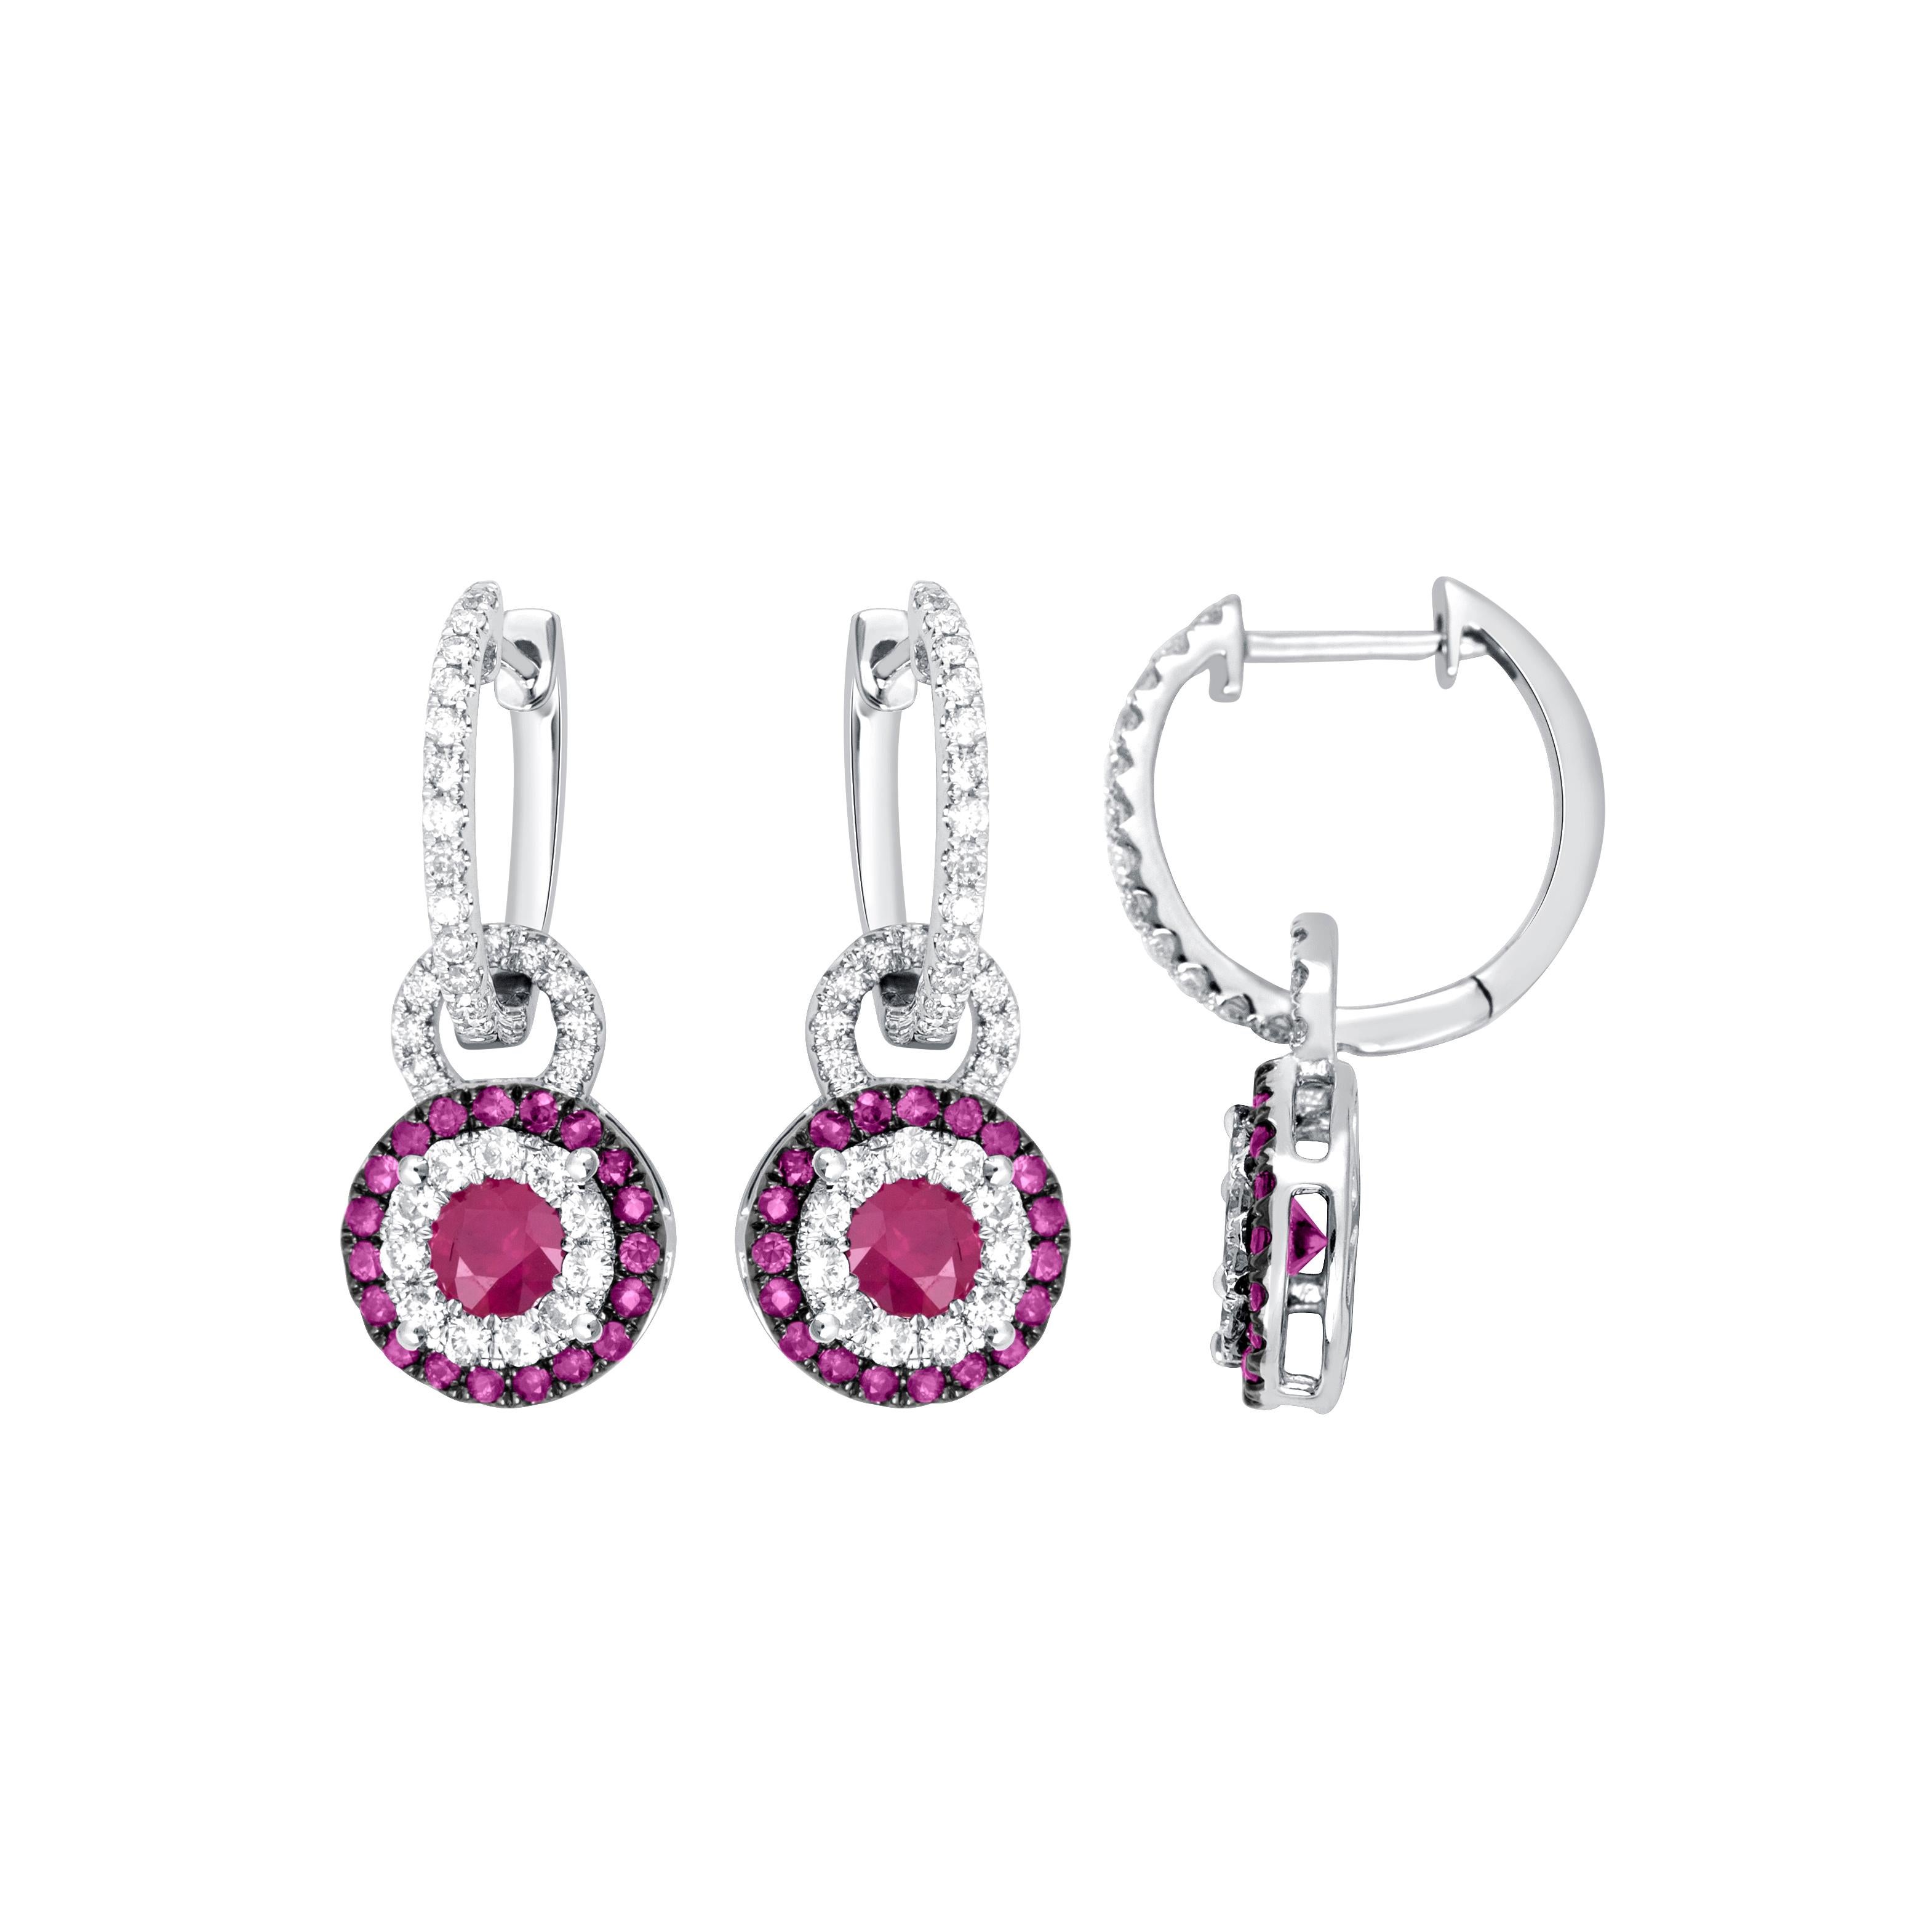 Elegant 14 karat White Gold, Ruby And Diamond Earring.

Diamonds of approximately 0.64 carats, ruby approximately of 1.17 carats mounted on 18 karat white gold earring. The earring weighs approximately around 4.028 grams.

Please note: The charges